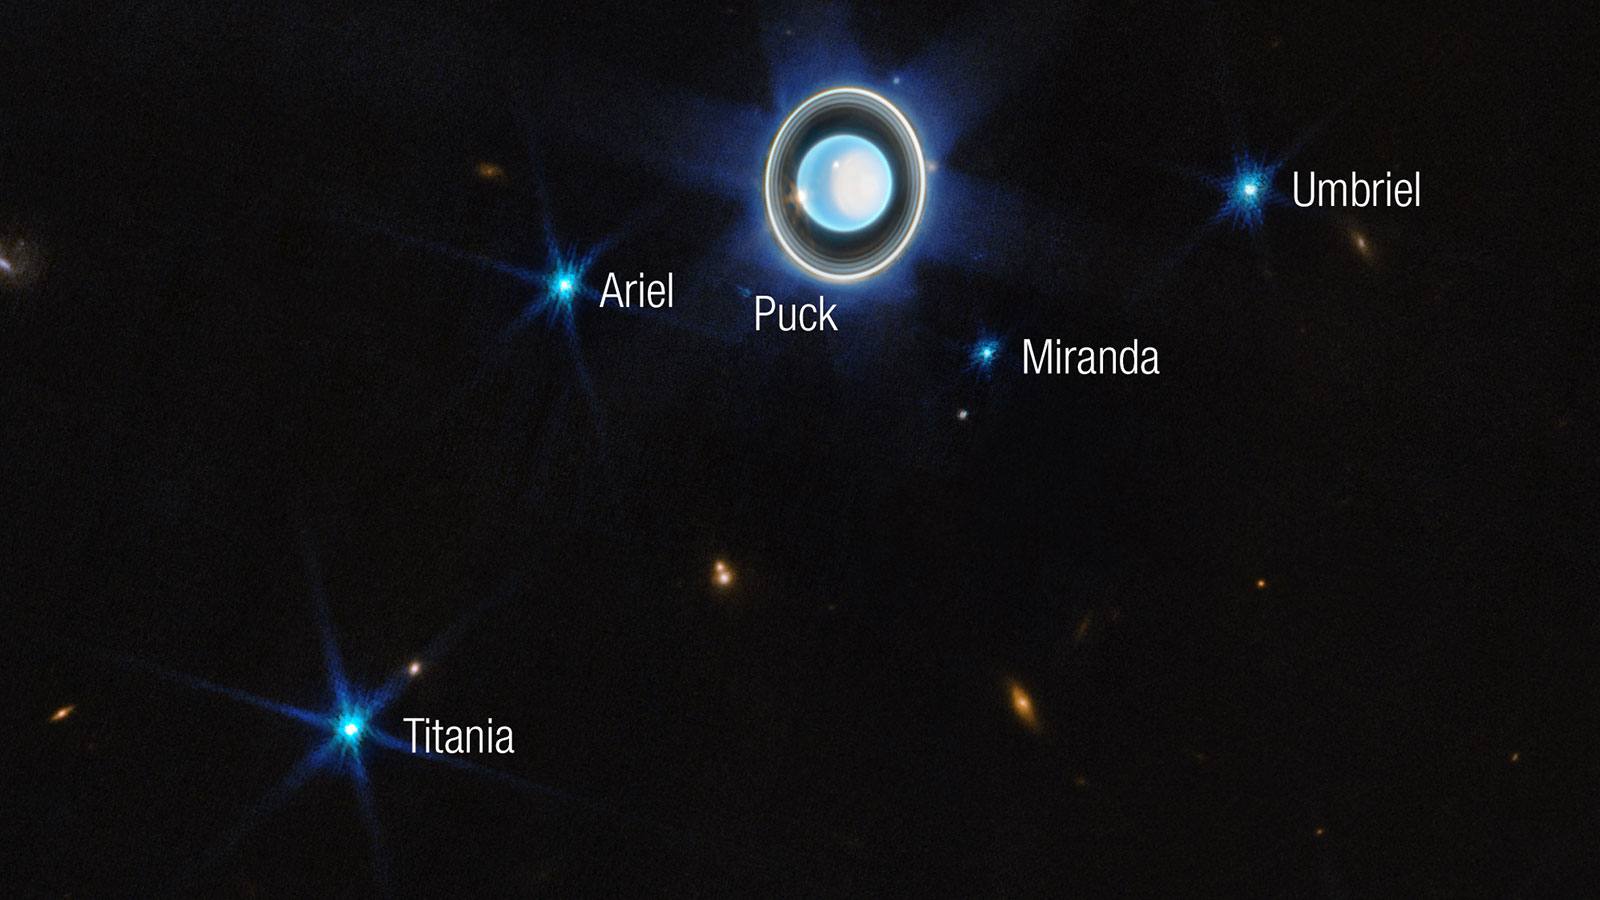 slide 2 - Uranus and six moons shine bright in this Webb Space Telescope image. The moons are (from left to right) Titania, Ariel, Puck, Miranda, Umbriel, and Oberon.